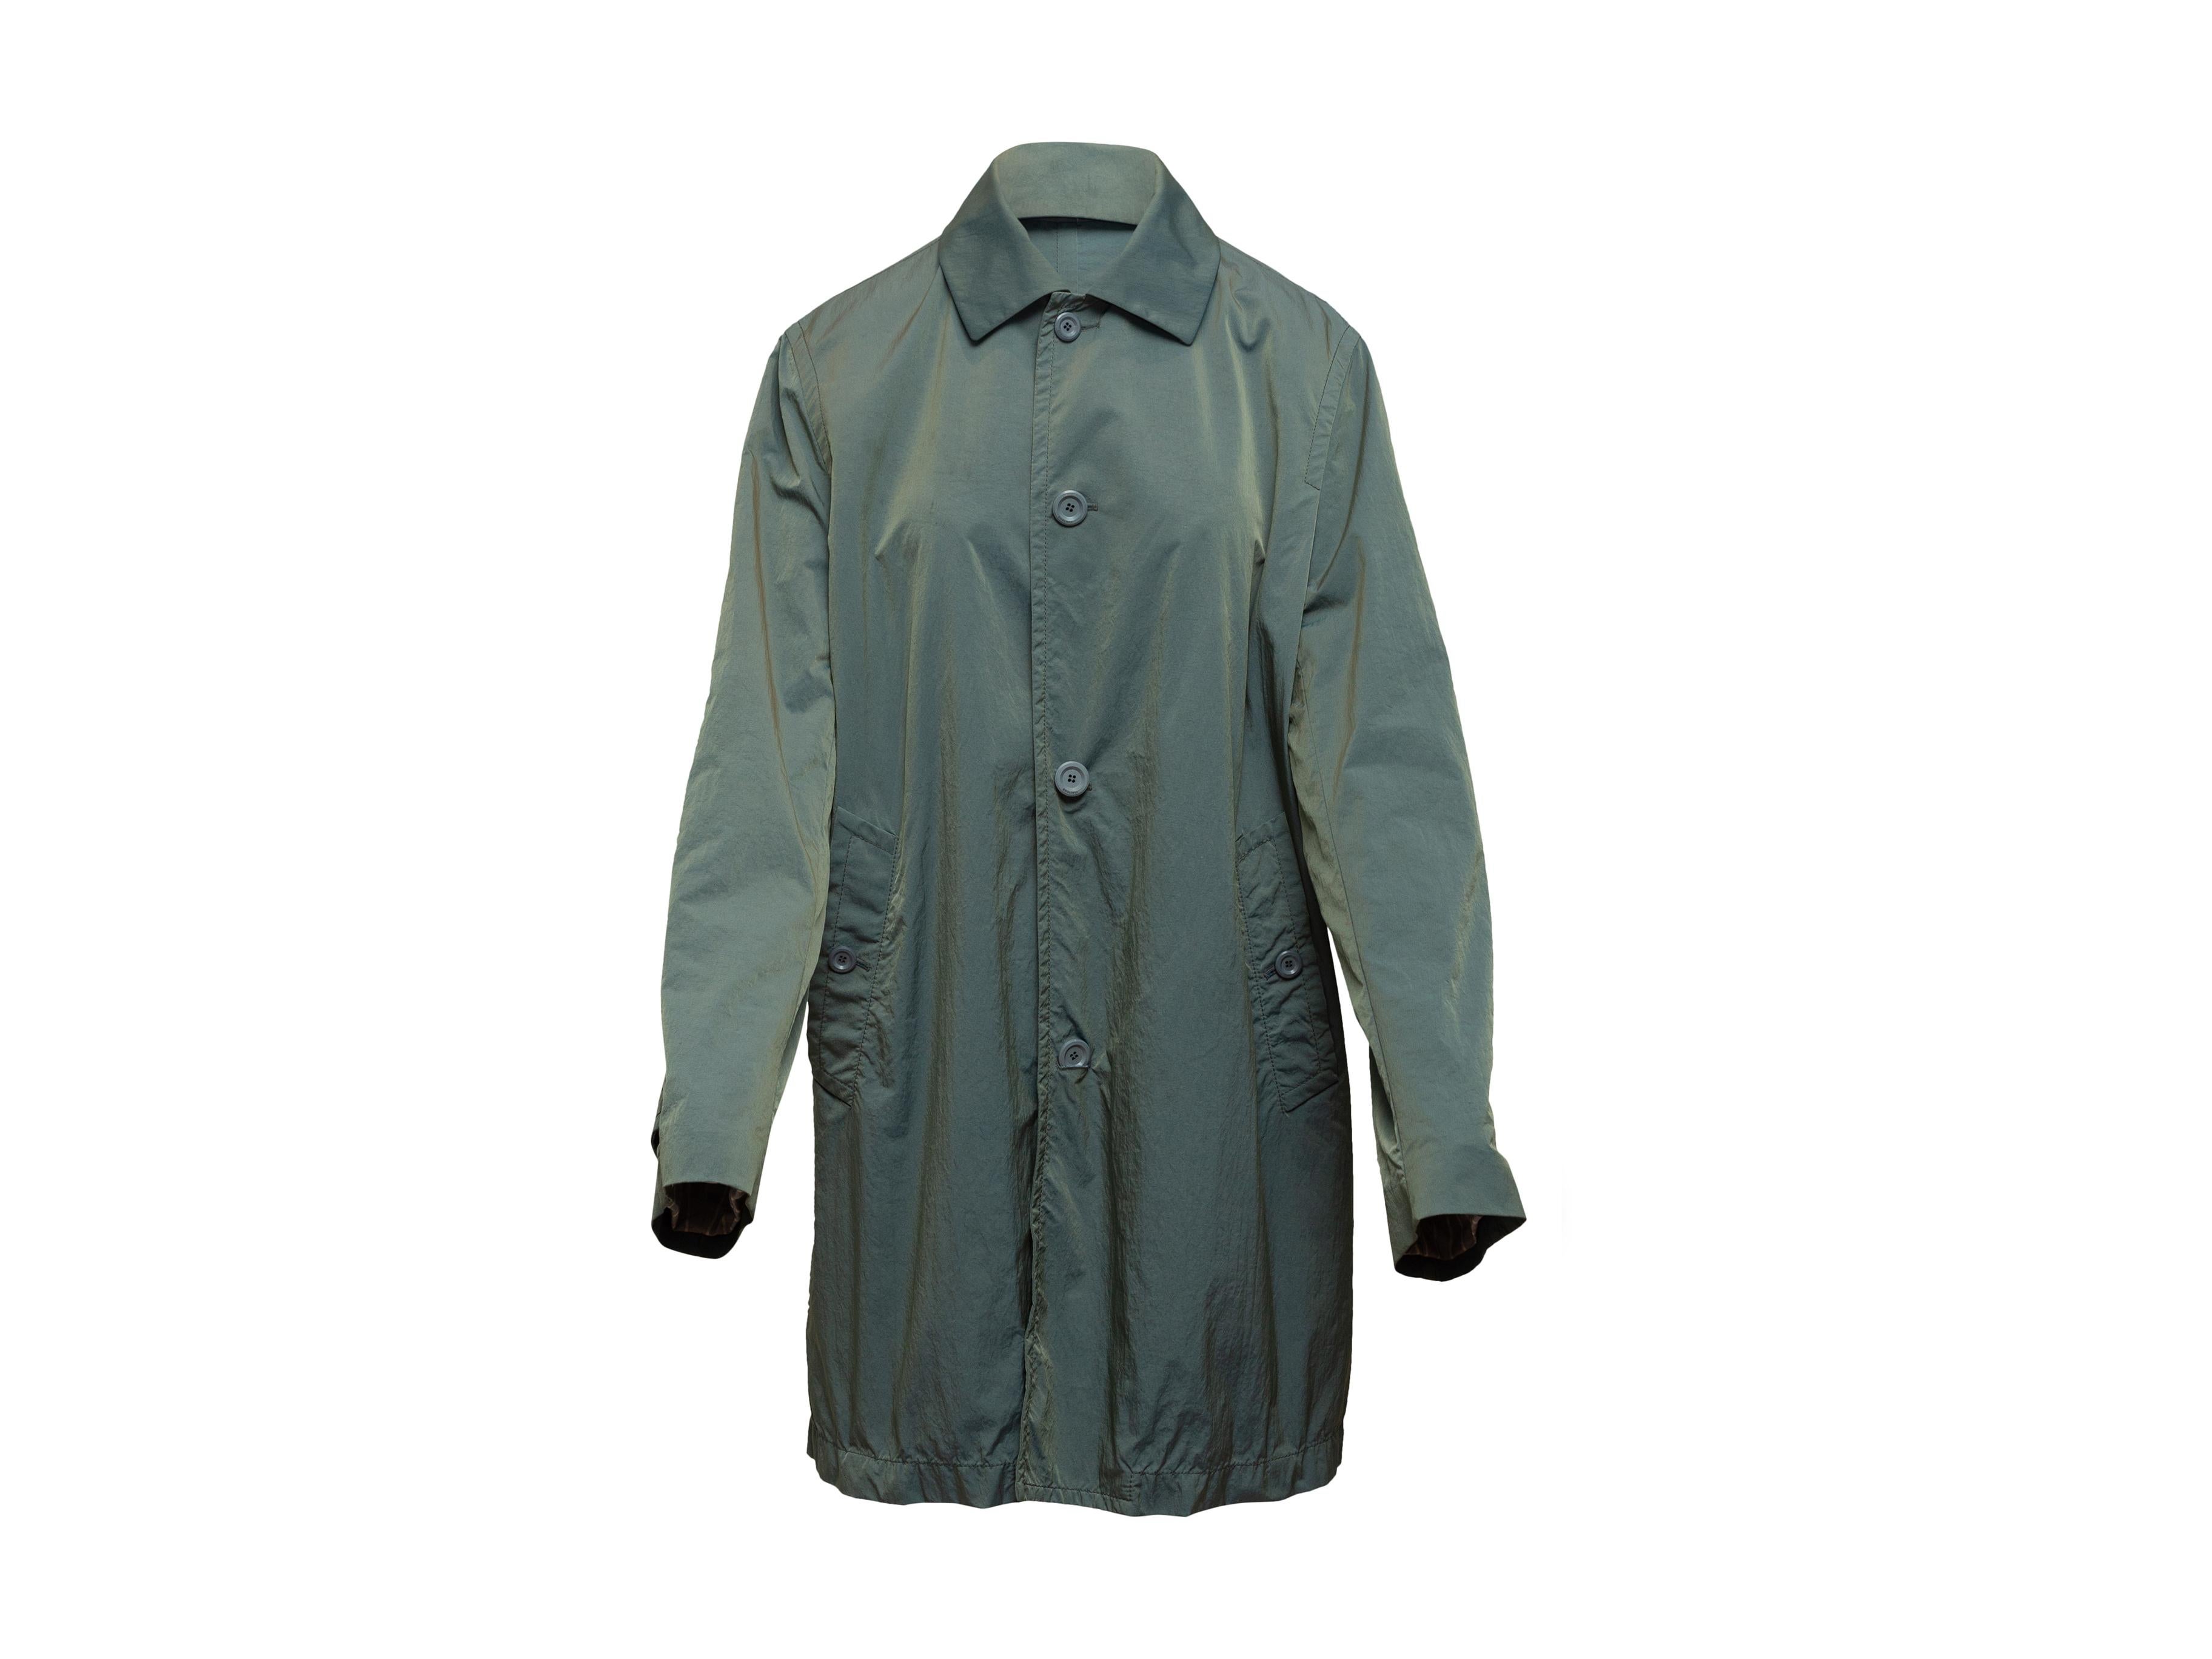 Product details: Sage green nylon coat by Boglioli. Pointed collar. Dual hip pockets. Button closures at center front. 36